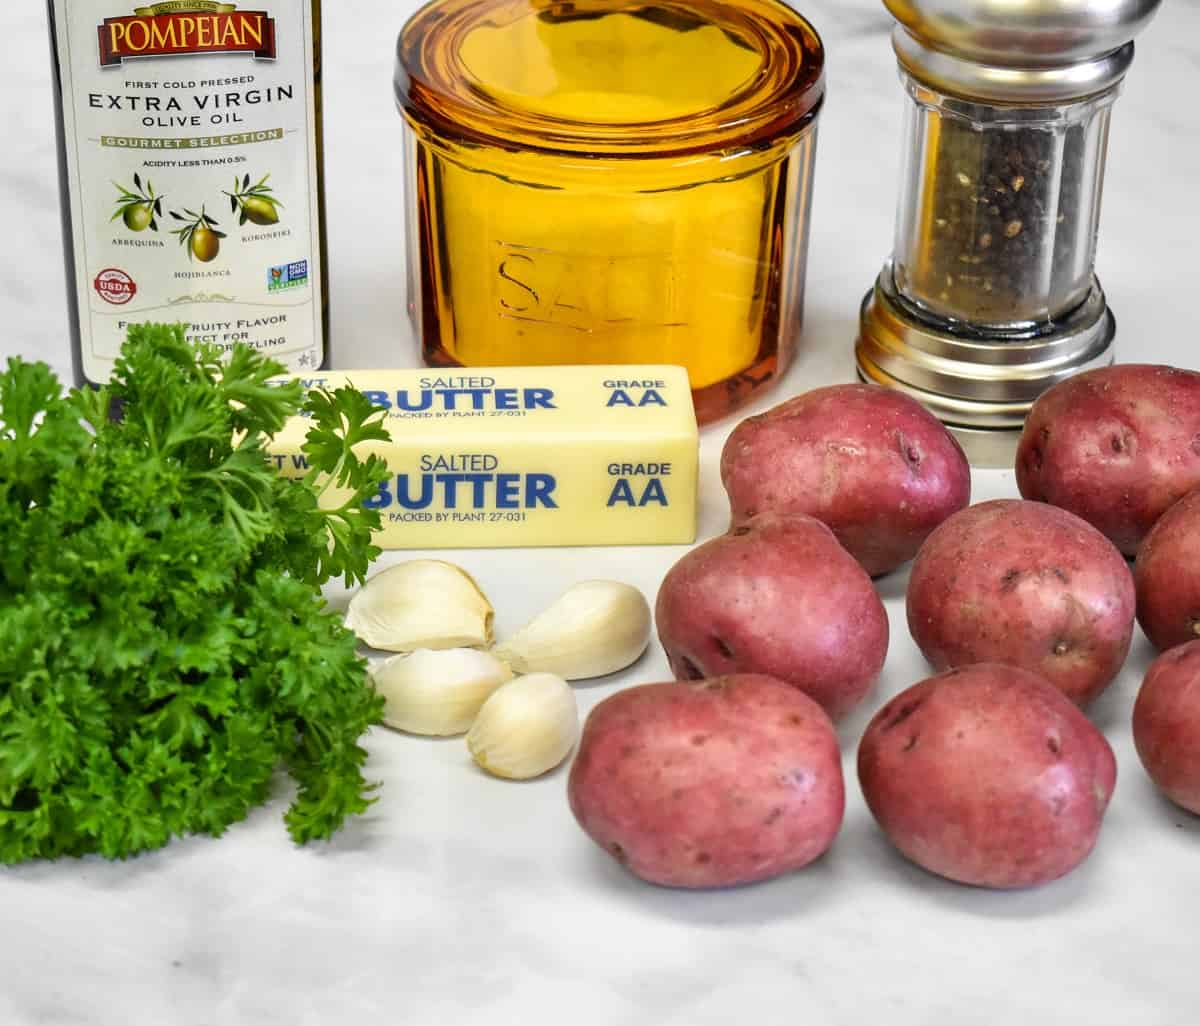 The ingredients for the parsley potatoes arranged on a white table.